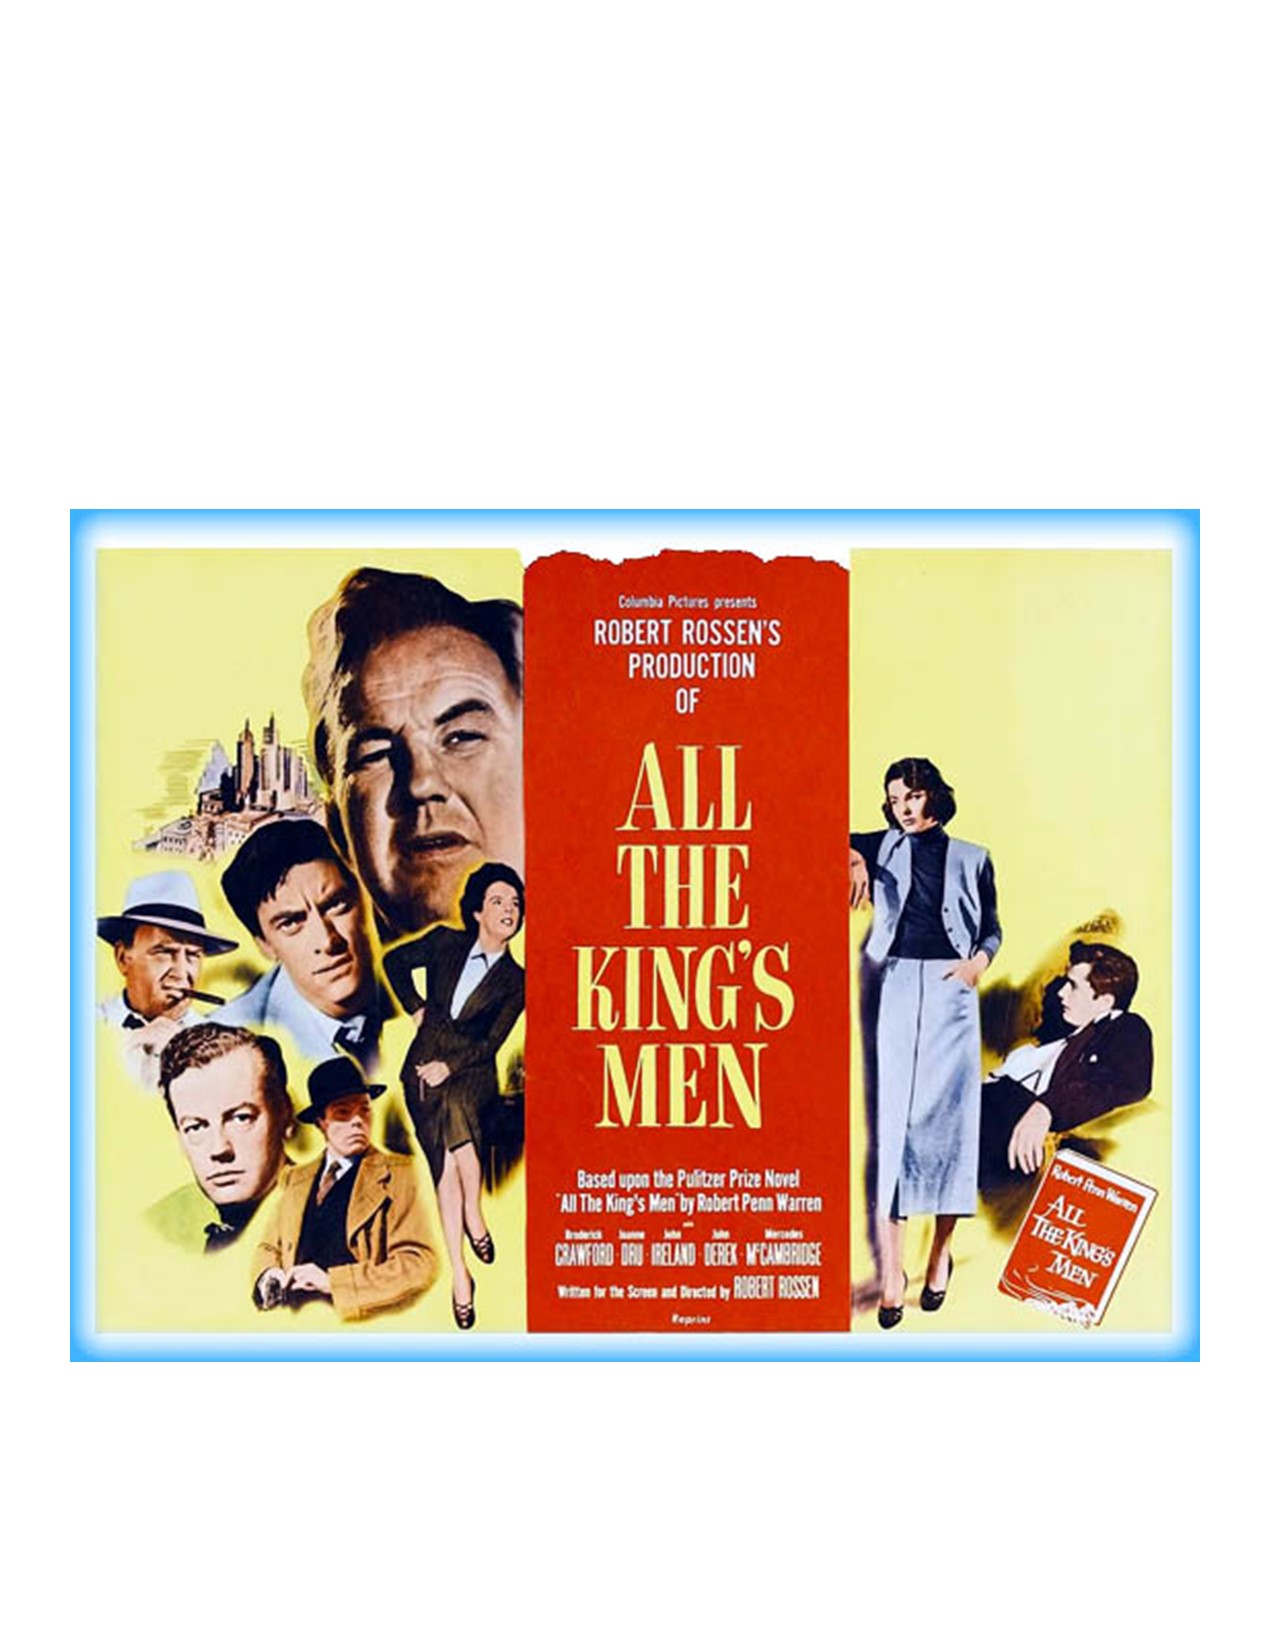 Classic movie poster with the title and drawings of characters' faces surrounding the text.